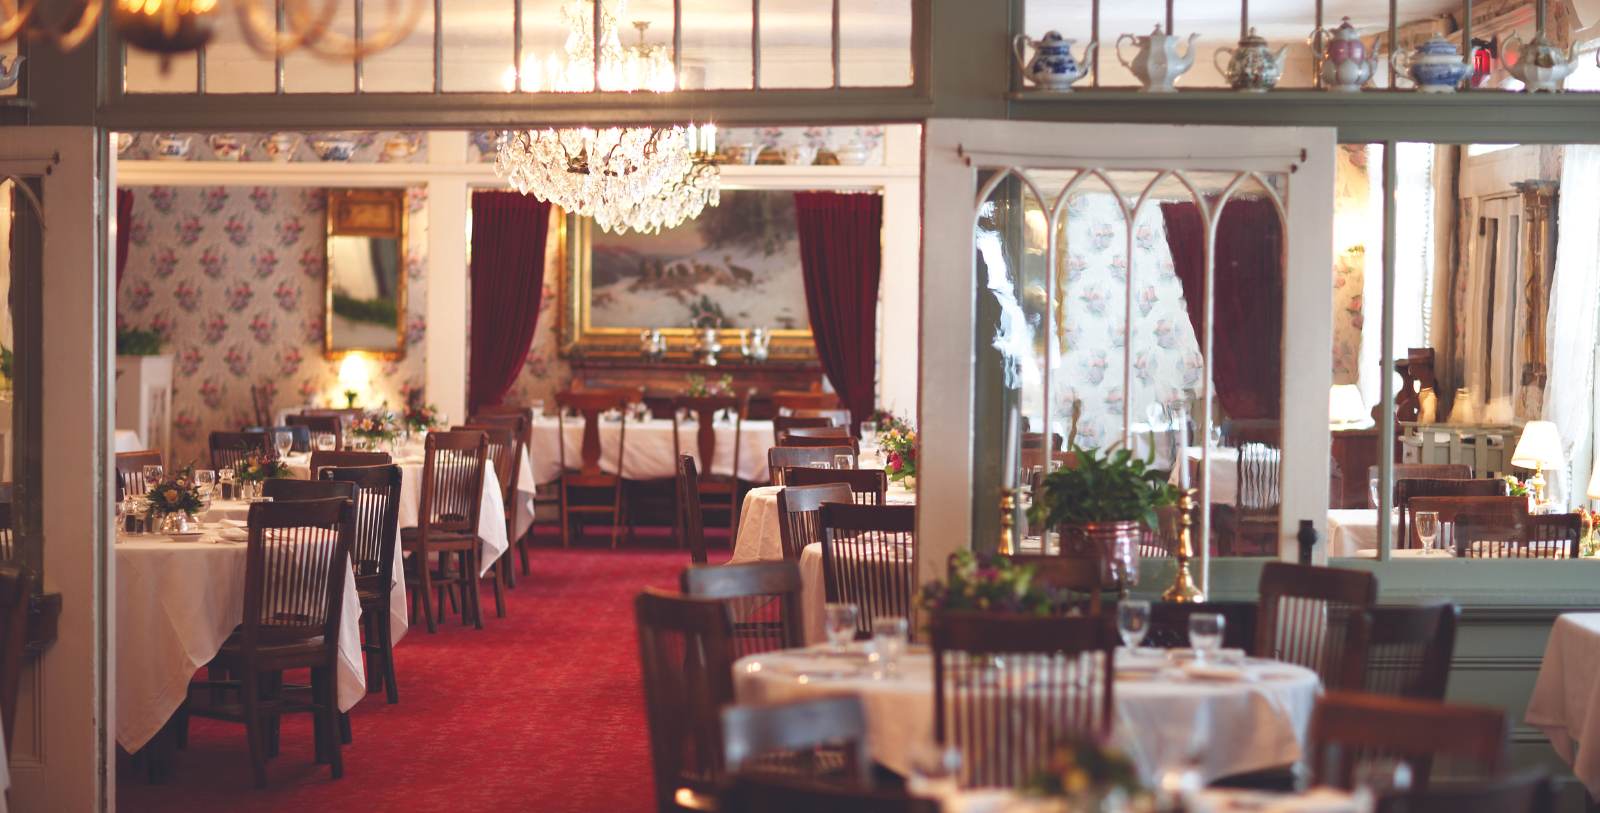 Image of the Main Dining Room at The Red Lion Inn, a member of Historic Hotels of America since 1989, located in Stockbridge, Massachusetts